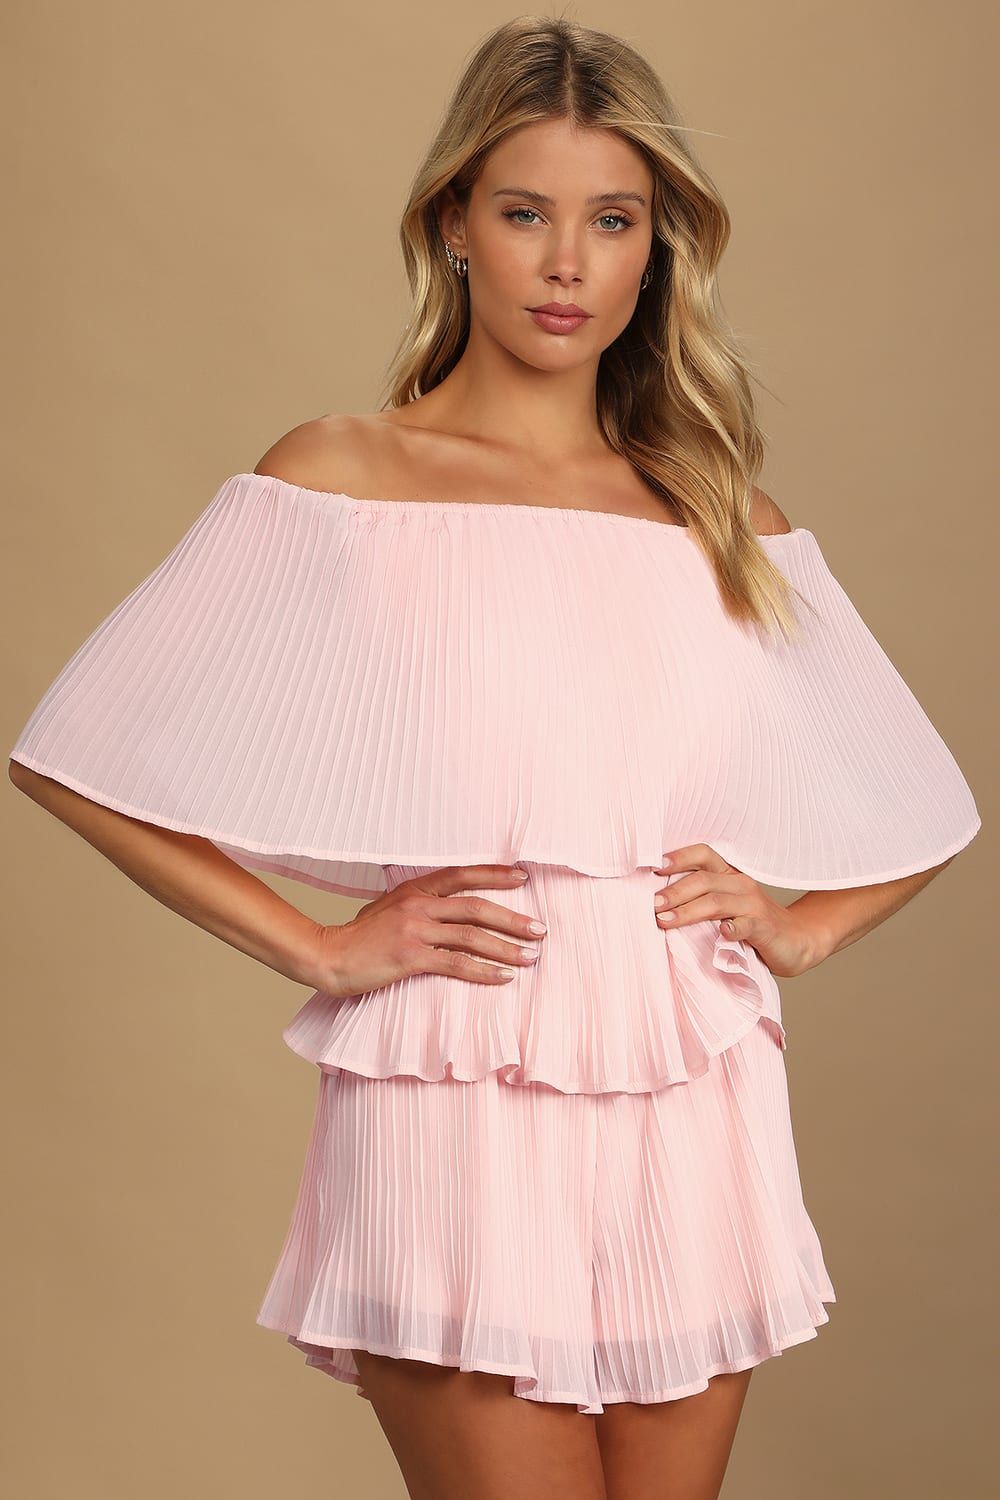 Gala Ready Light Pink Pleated Off-the-Shoulder Romper | Lulus